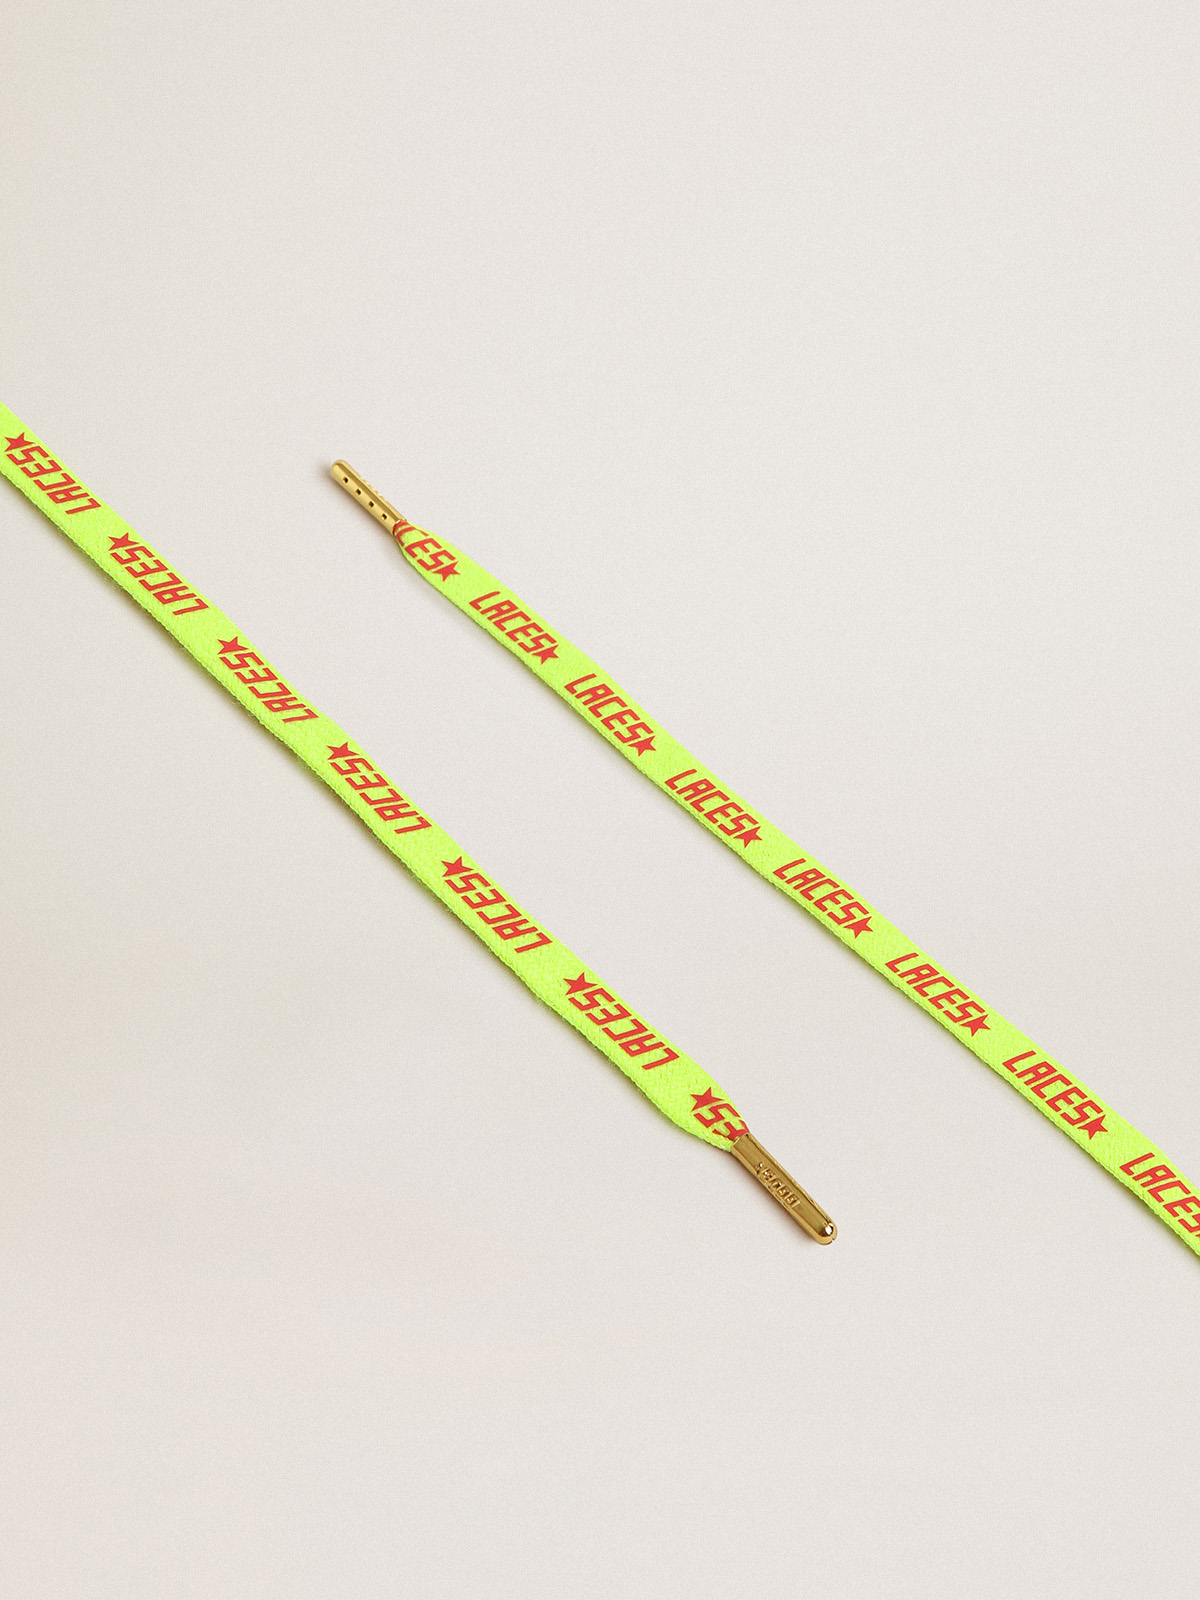 Fluorescent yellow laces with contrasting orange 'Laces' lettering